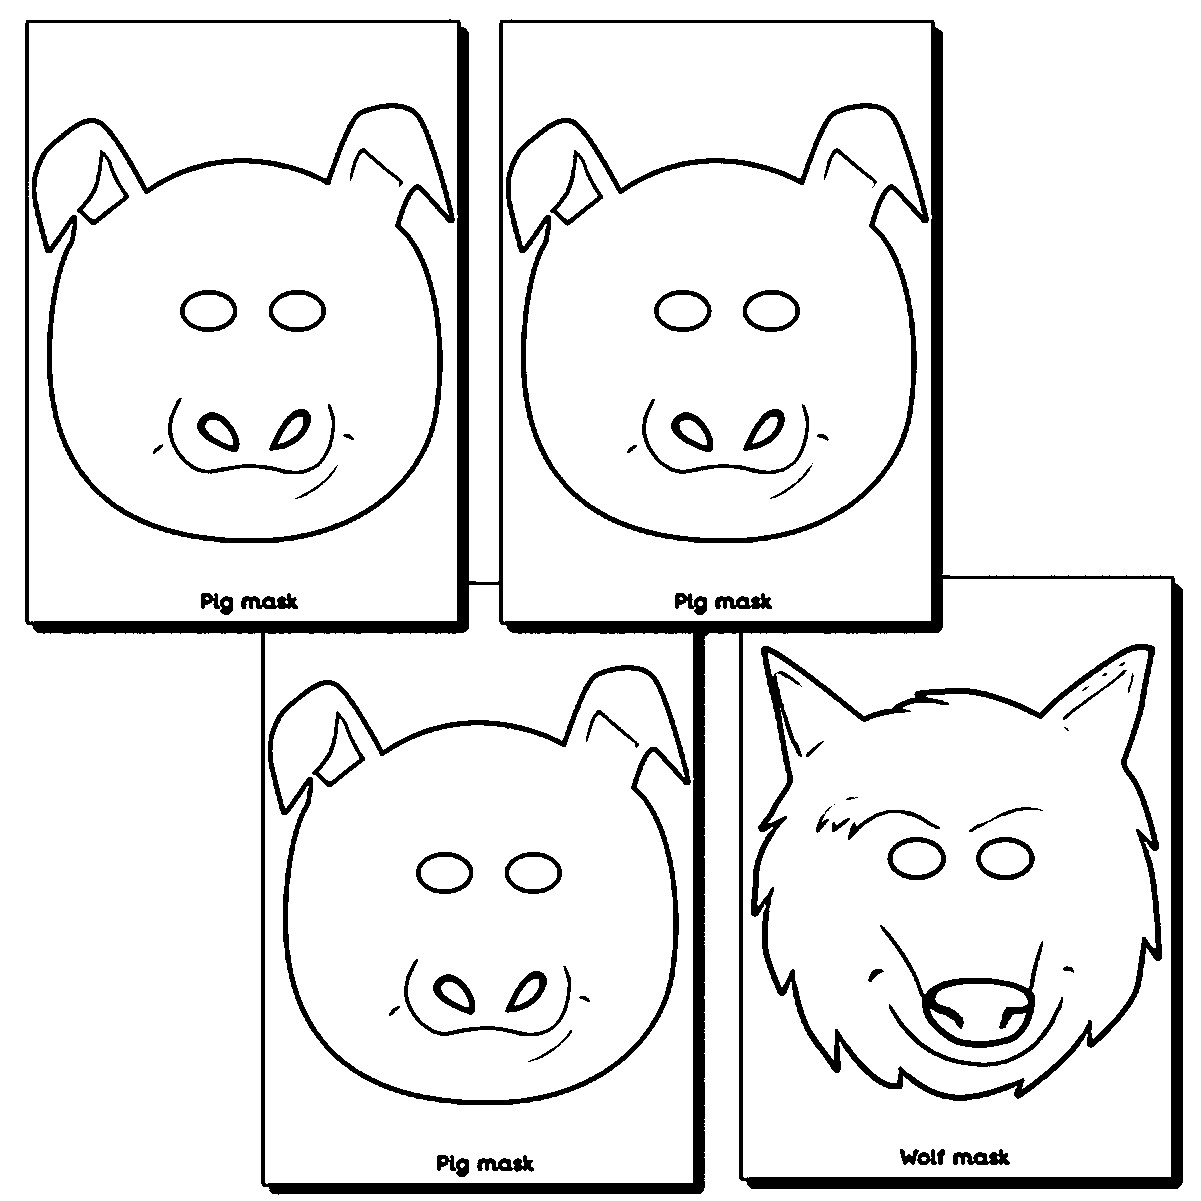 Preschool Coloring Sheets For The 3 Little Pigs Wolf Mask
 3 Little Pigs And Wolf Masks Coloring Page